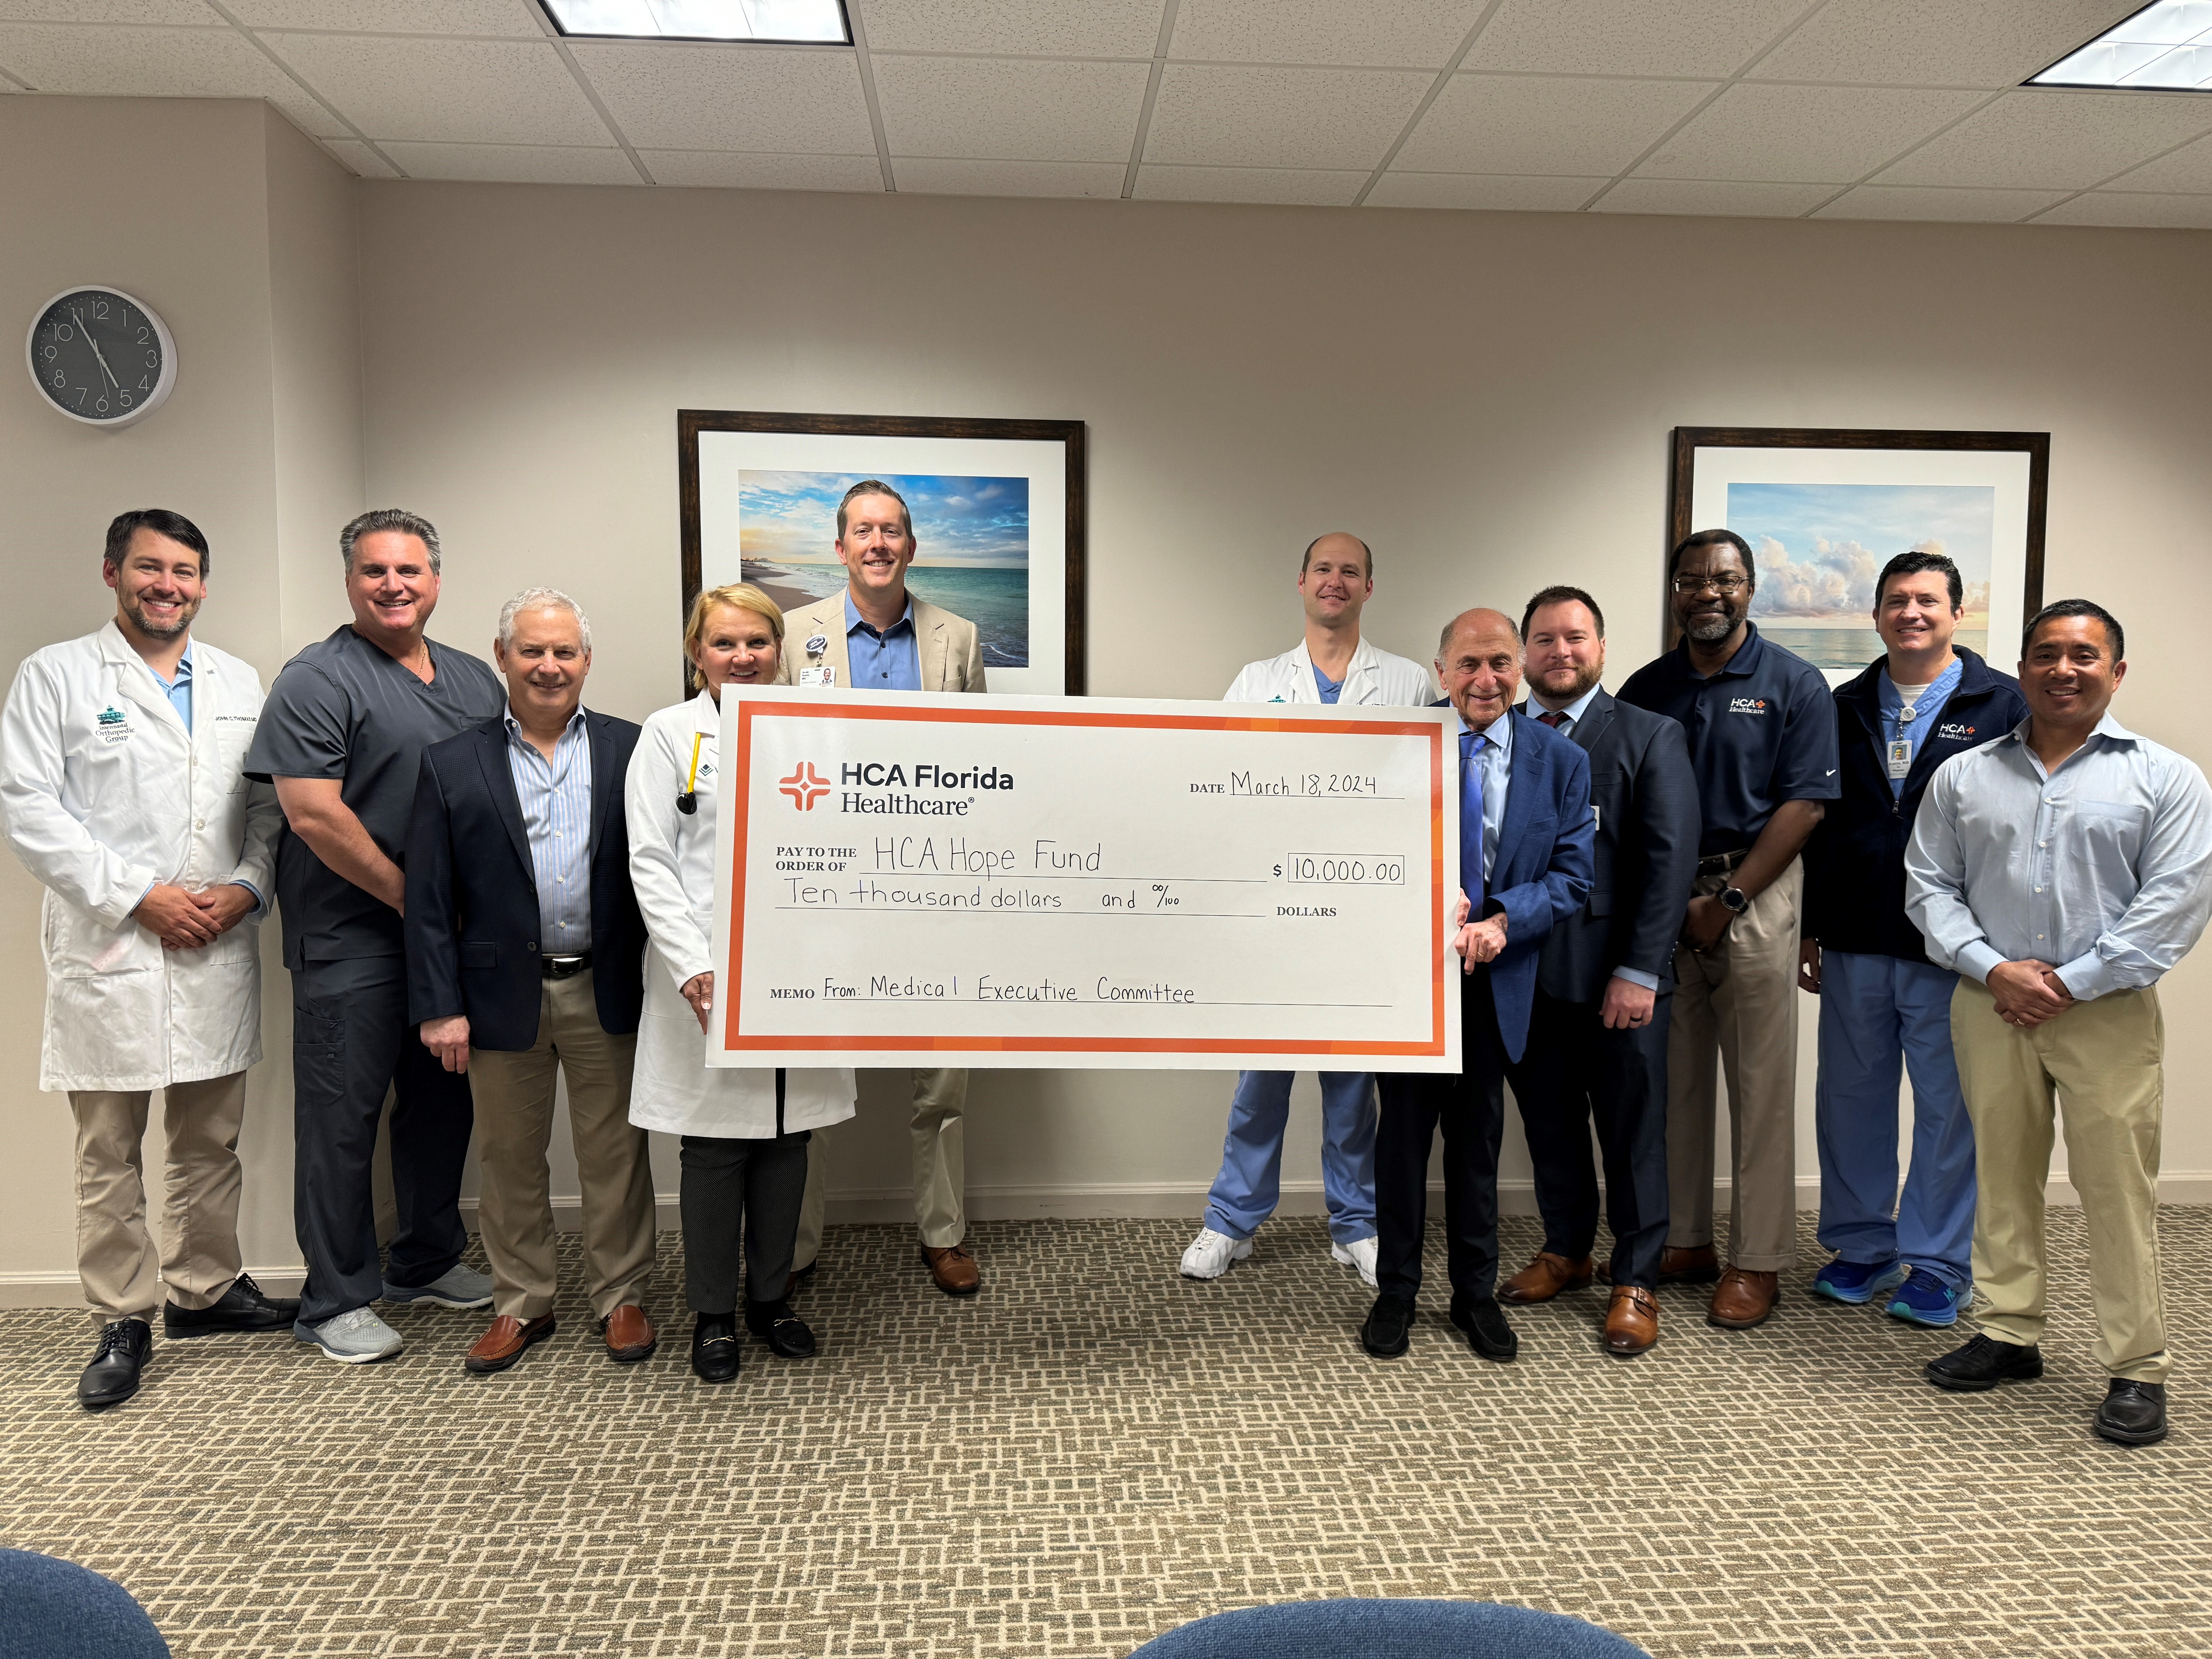 Sarasota Doctors Hospital physicians stand with large check for donation